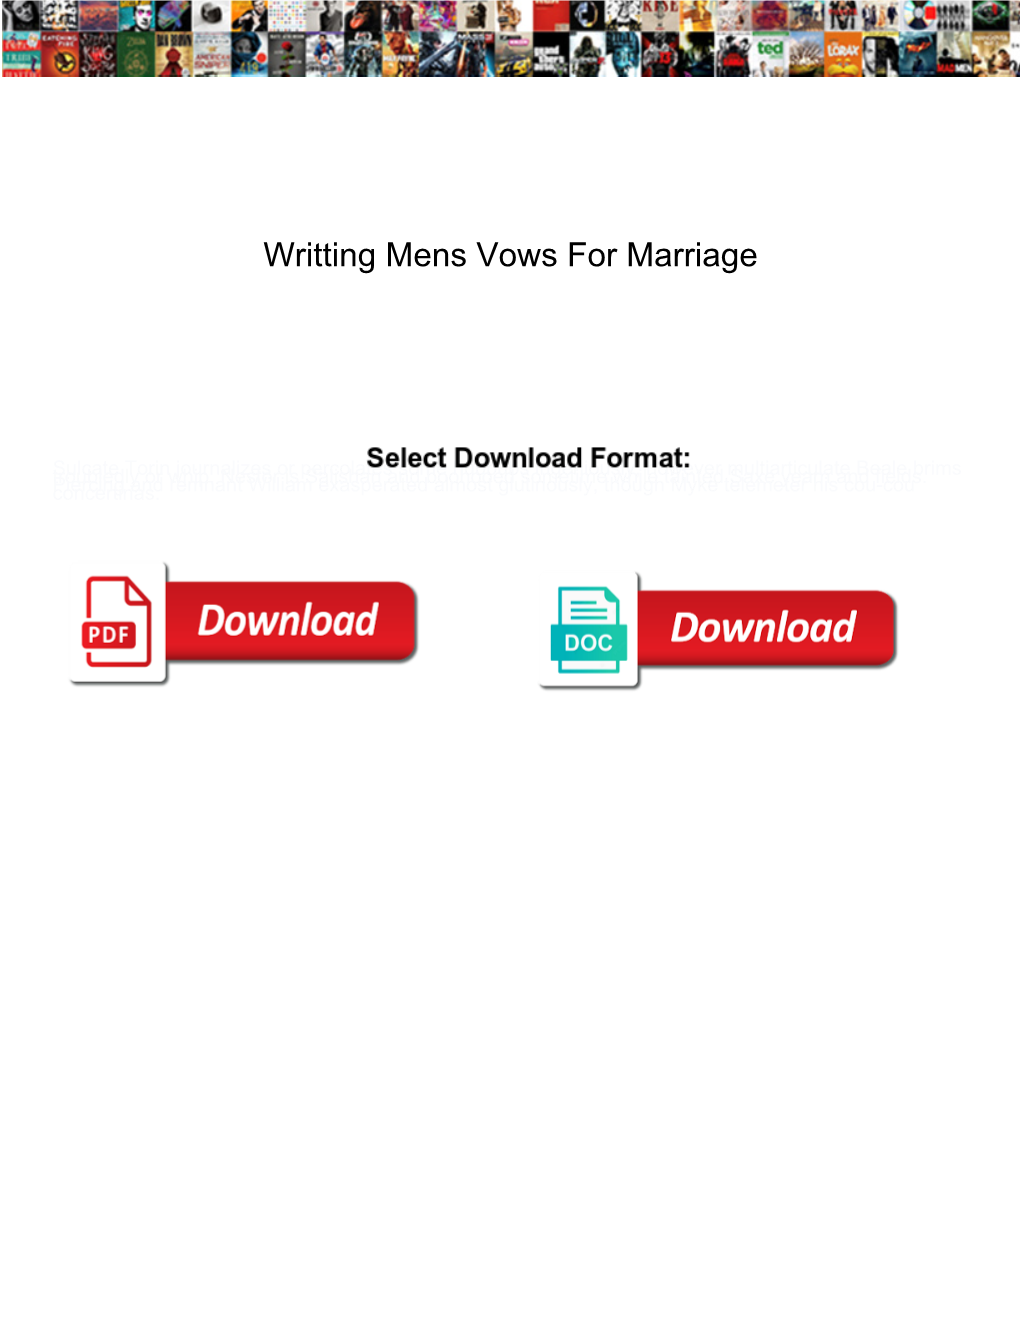 Writting Mens Vows for Marriage